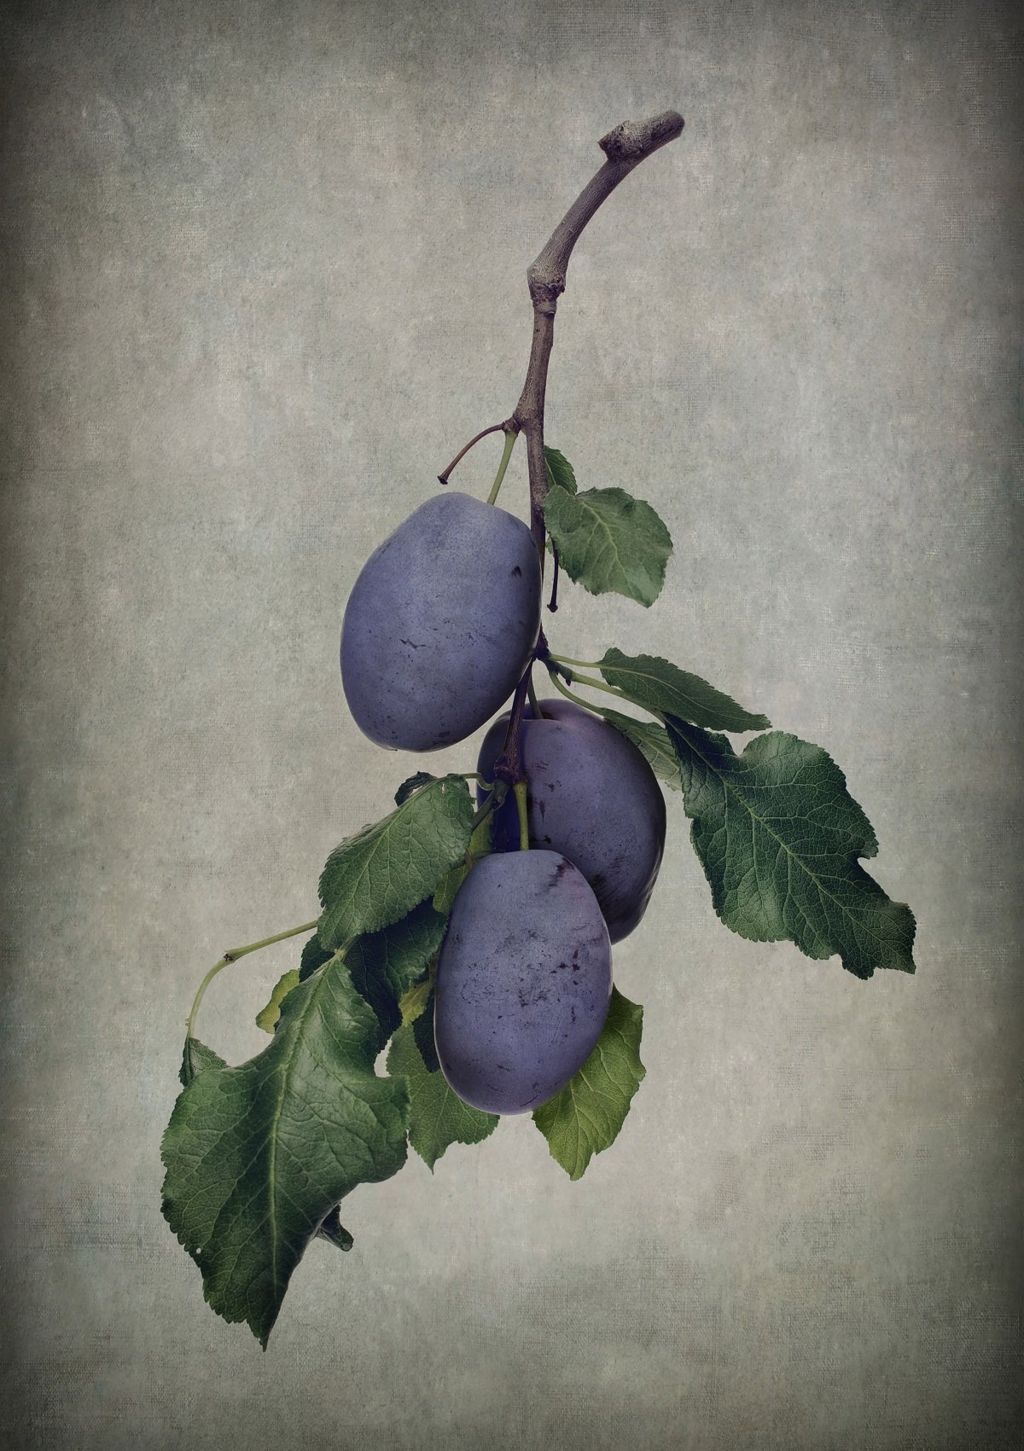 A branch with green leaves and purple plums